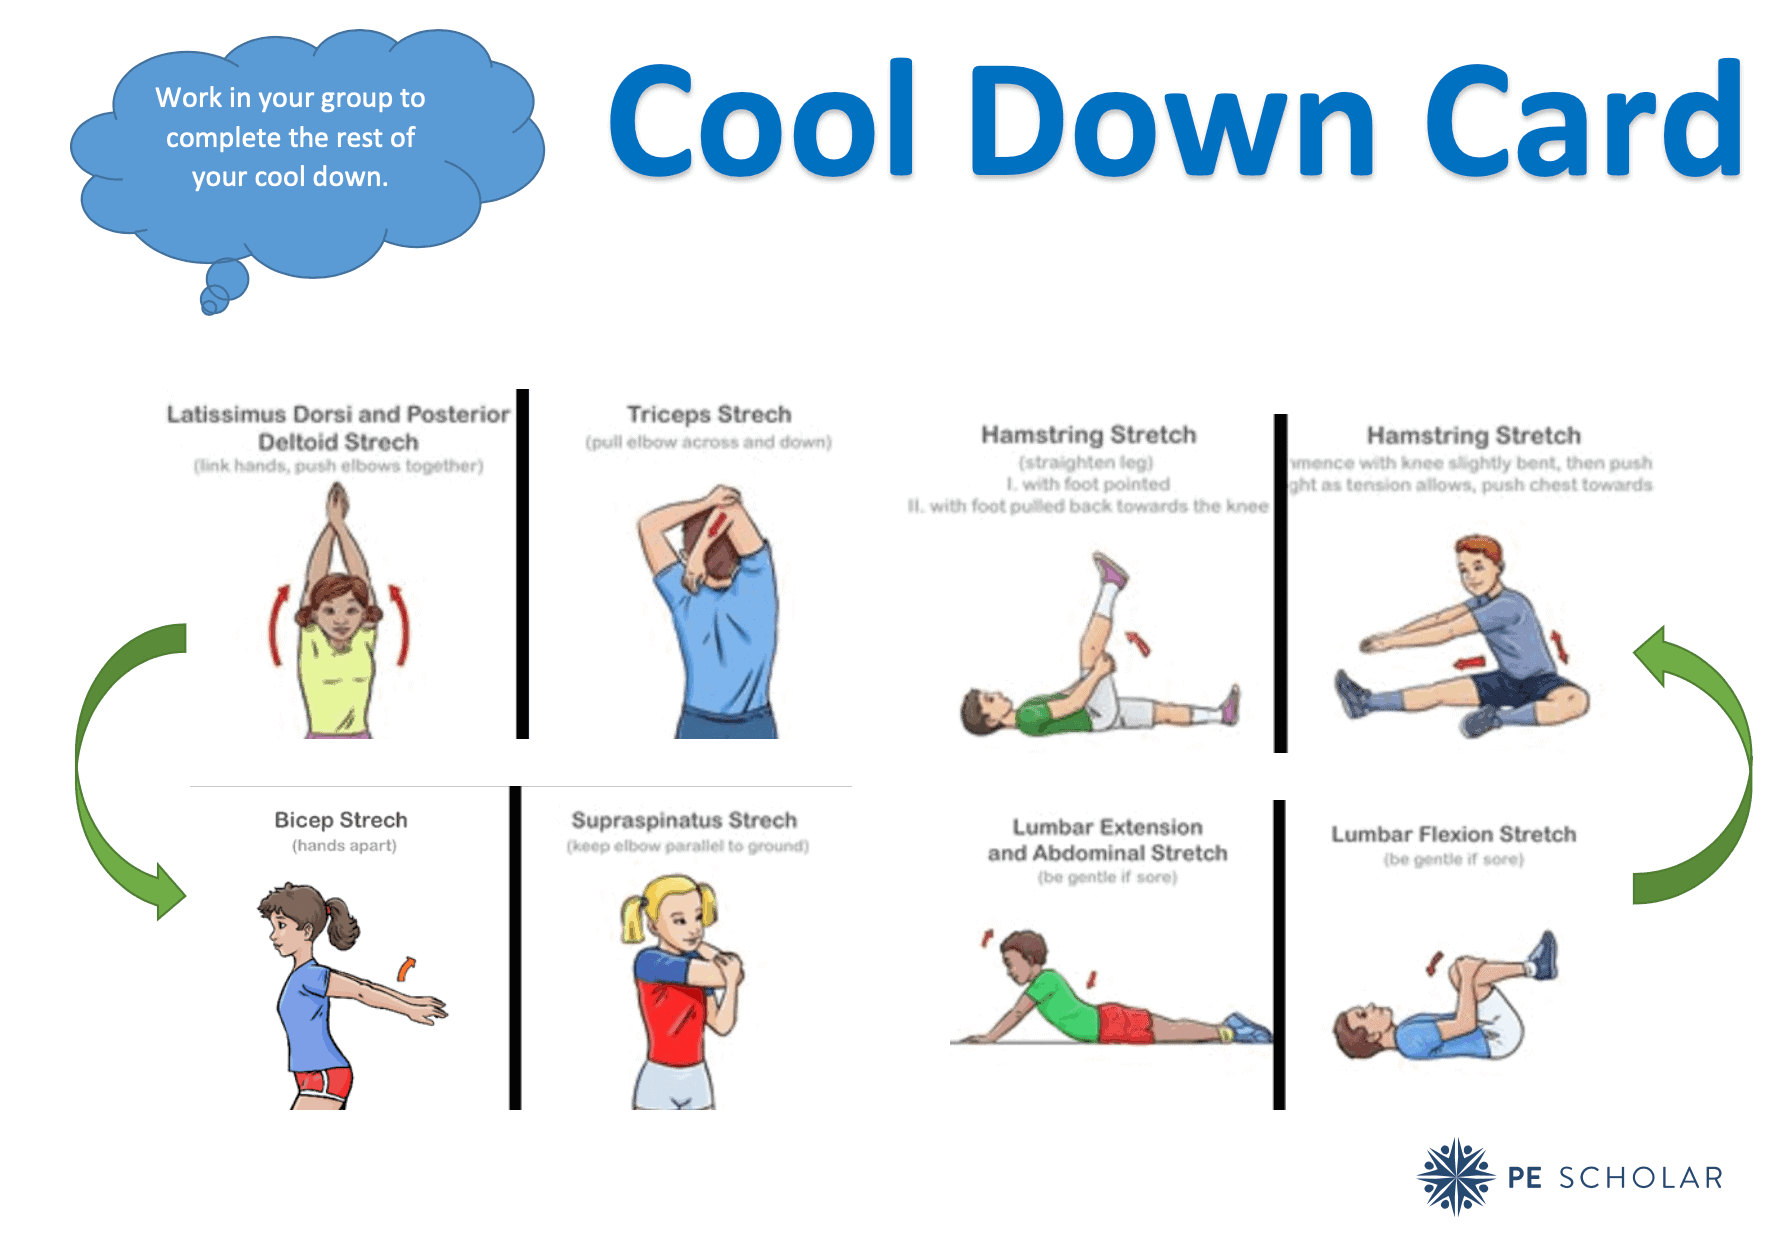 The Cool Down